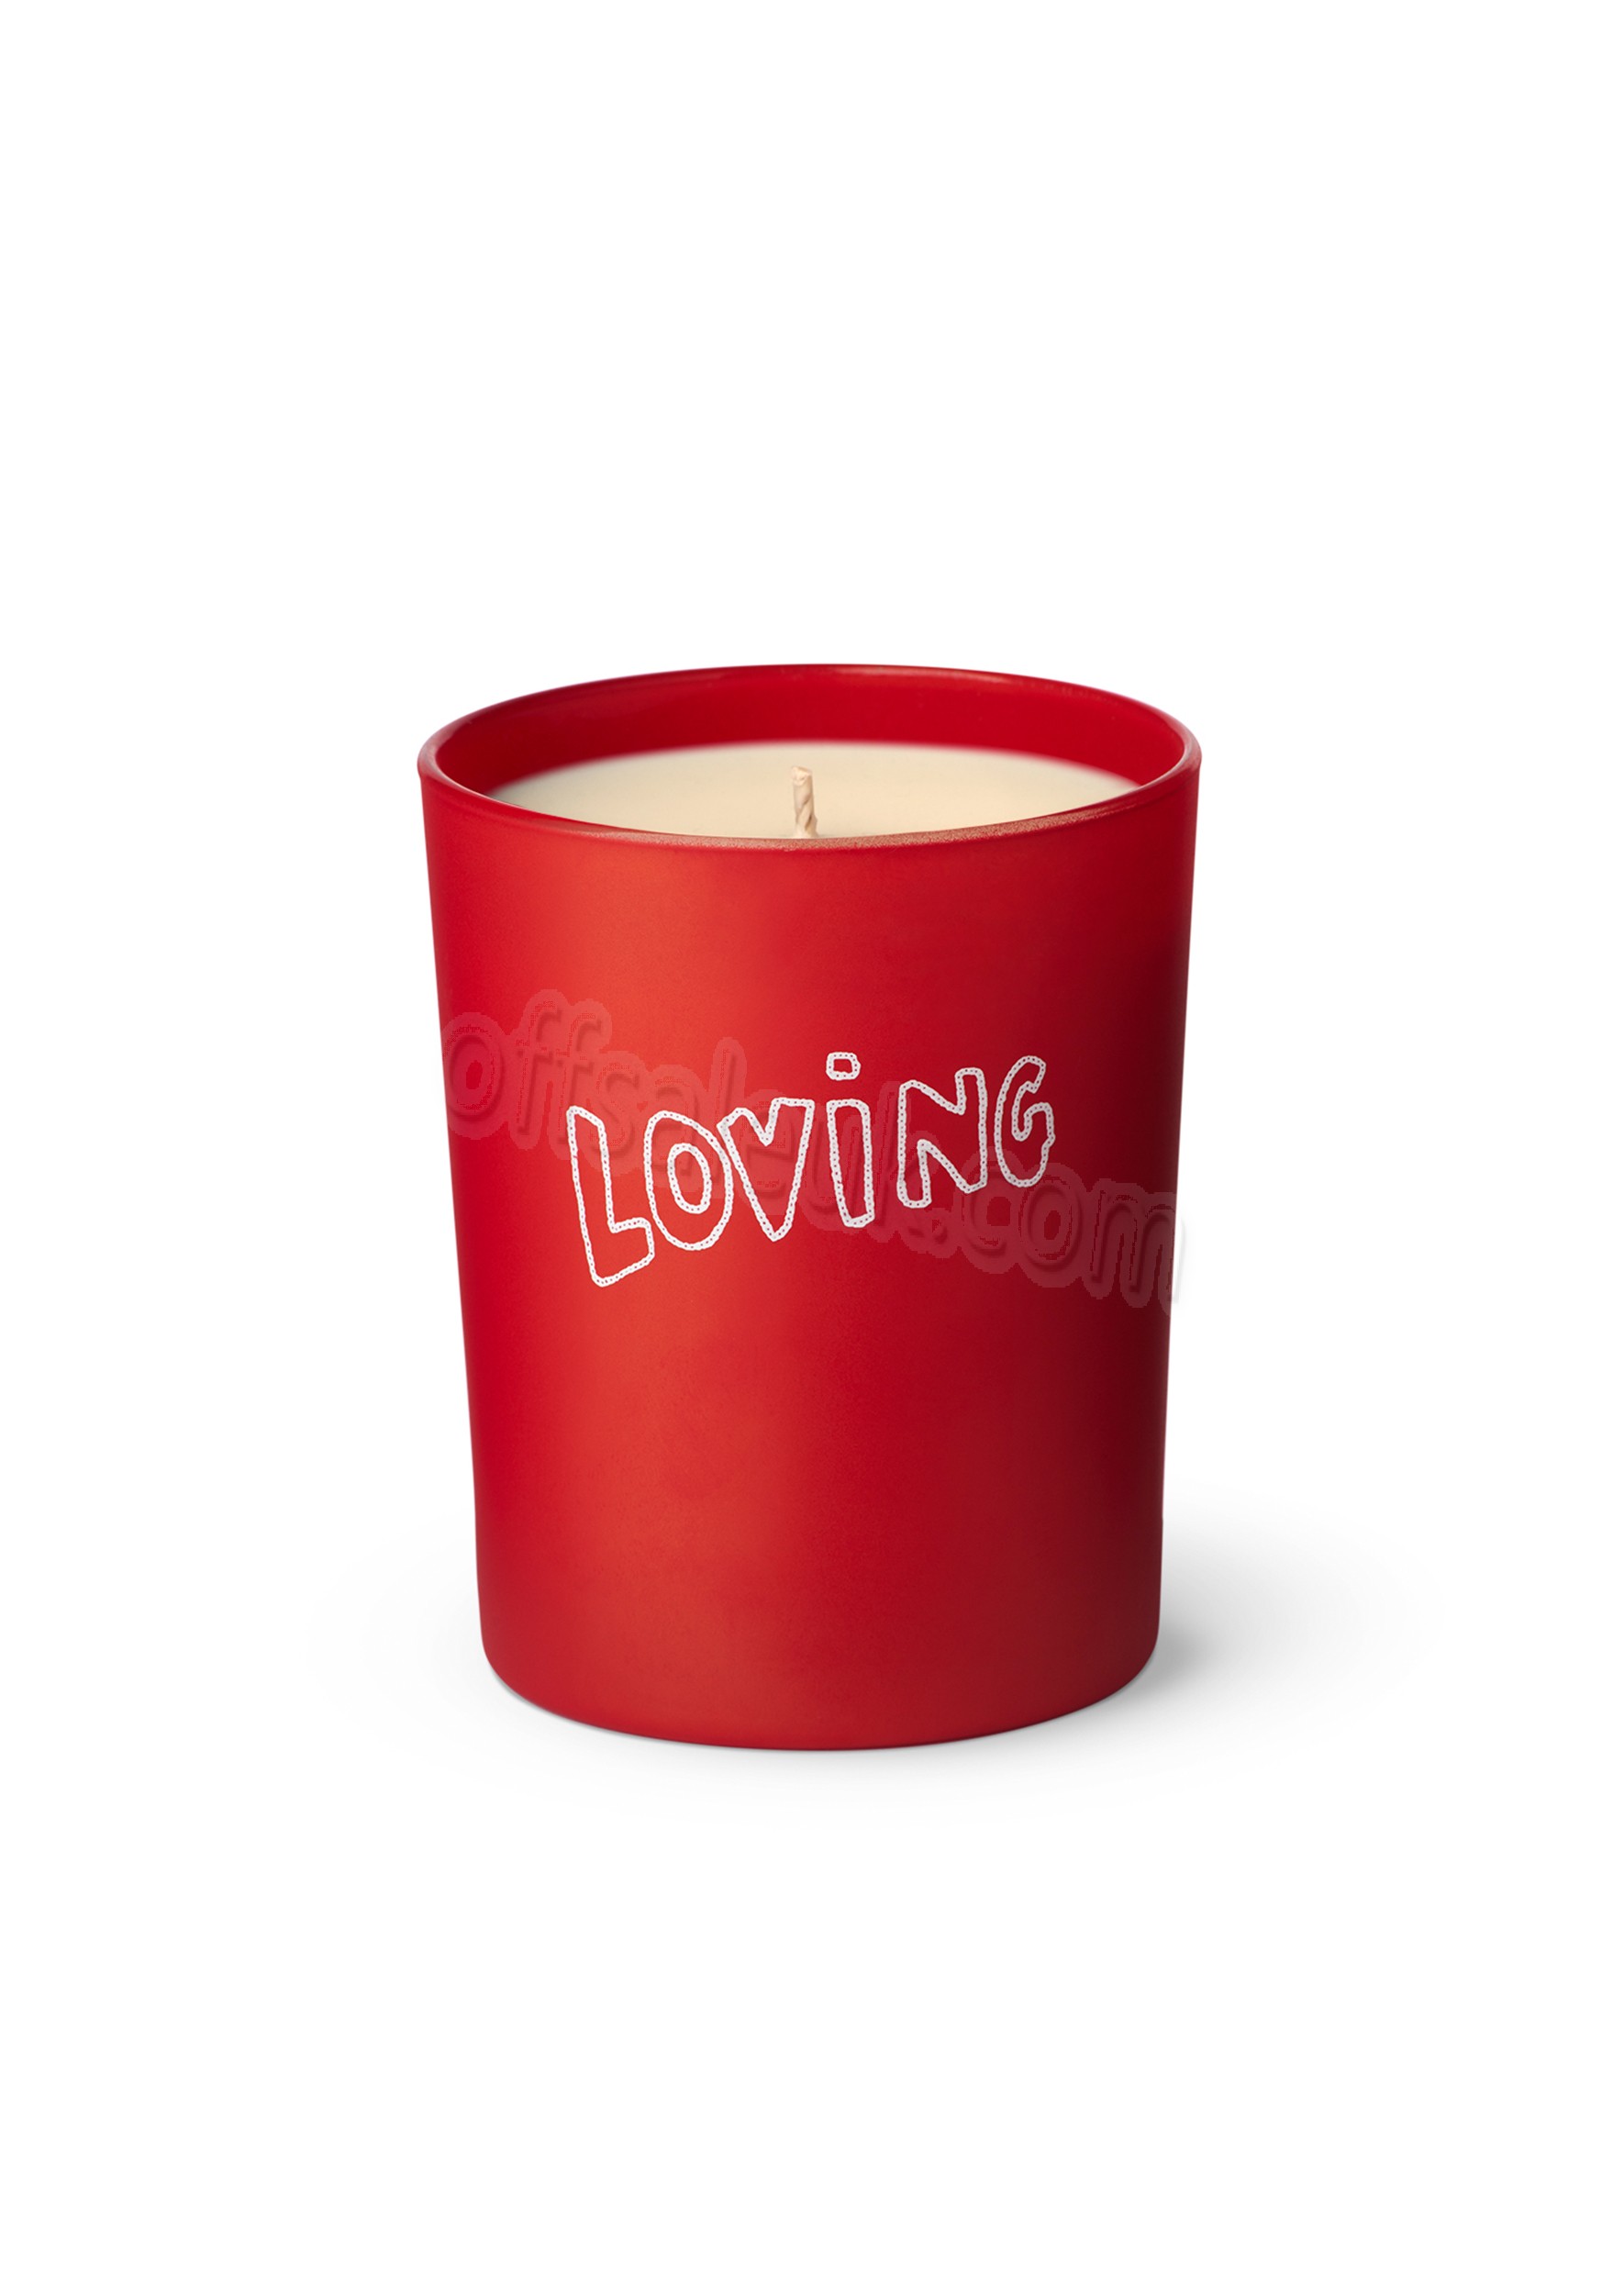 Cheap Loving Candle - Cheap Loving Candle